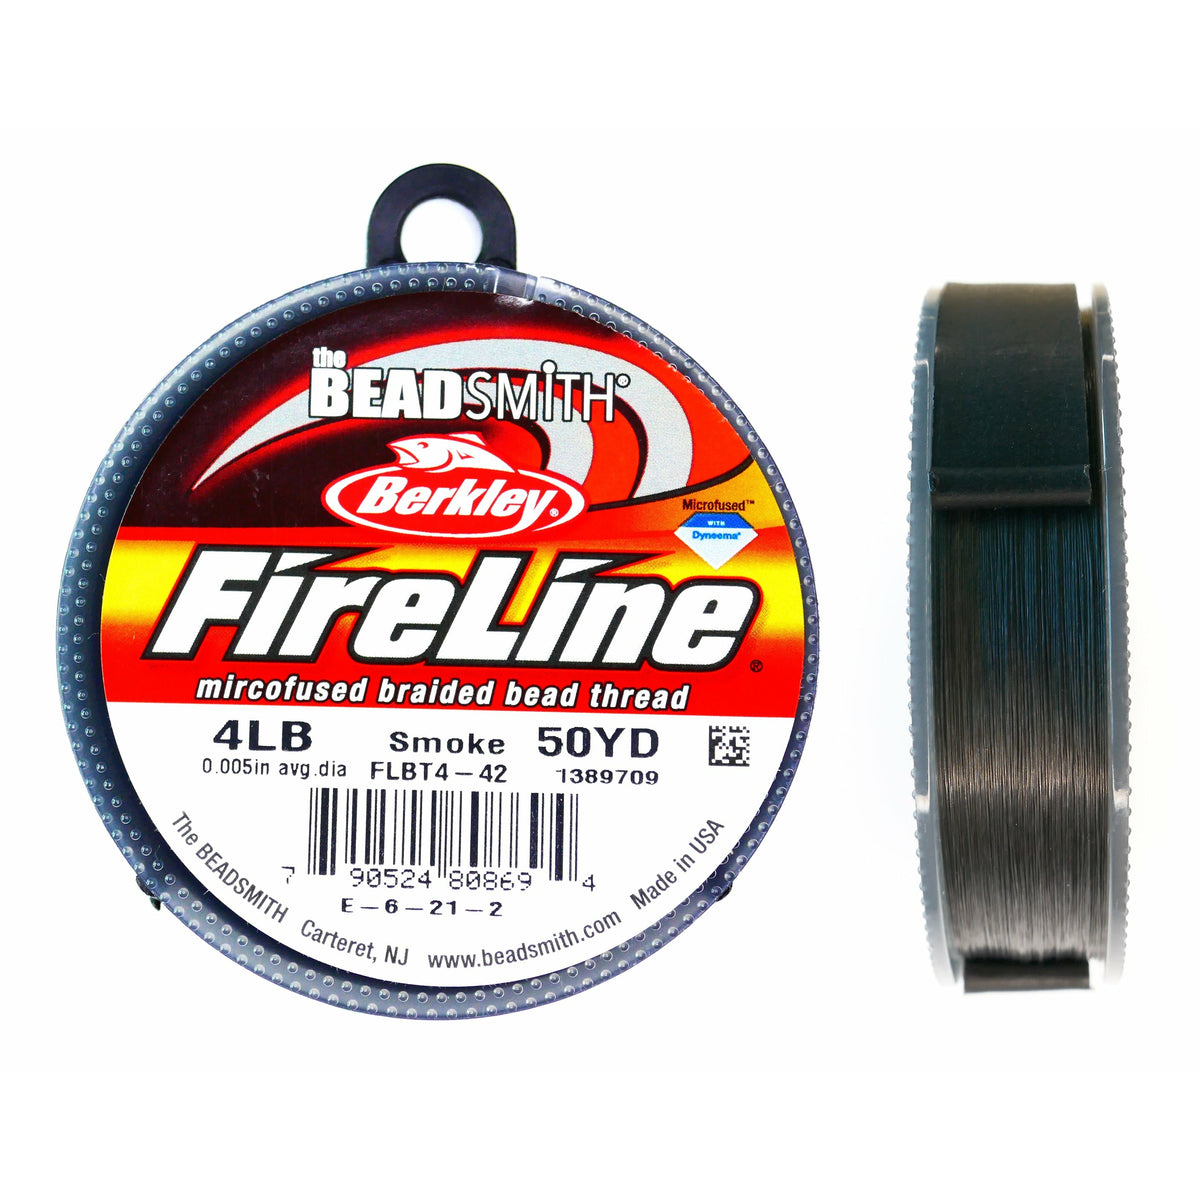 Beadsmith FireLine Braided Bead Thread, 6-Pound, 50 Yards (Crystal), Women's, Size: One size, Red